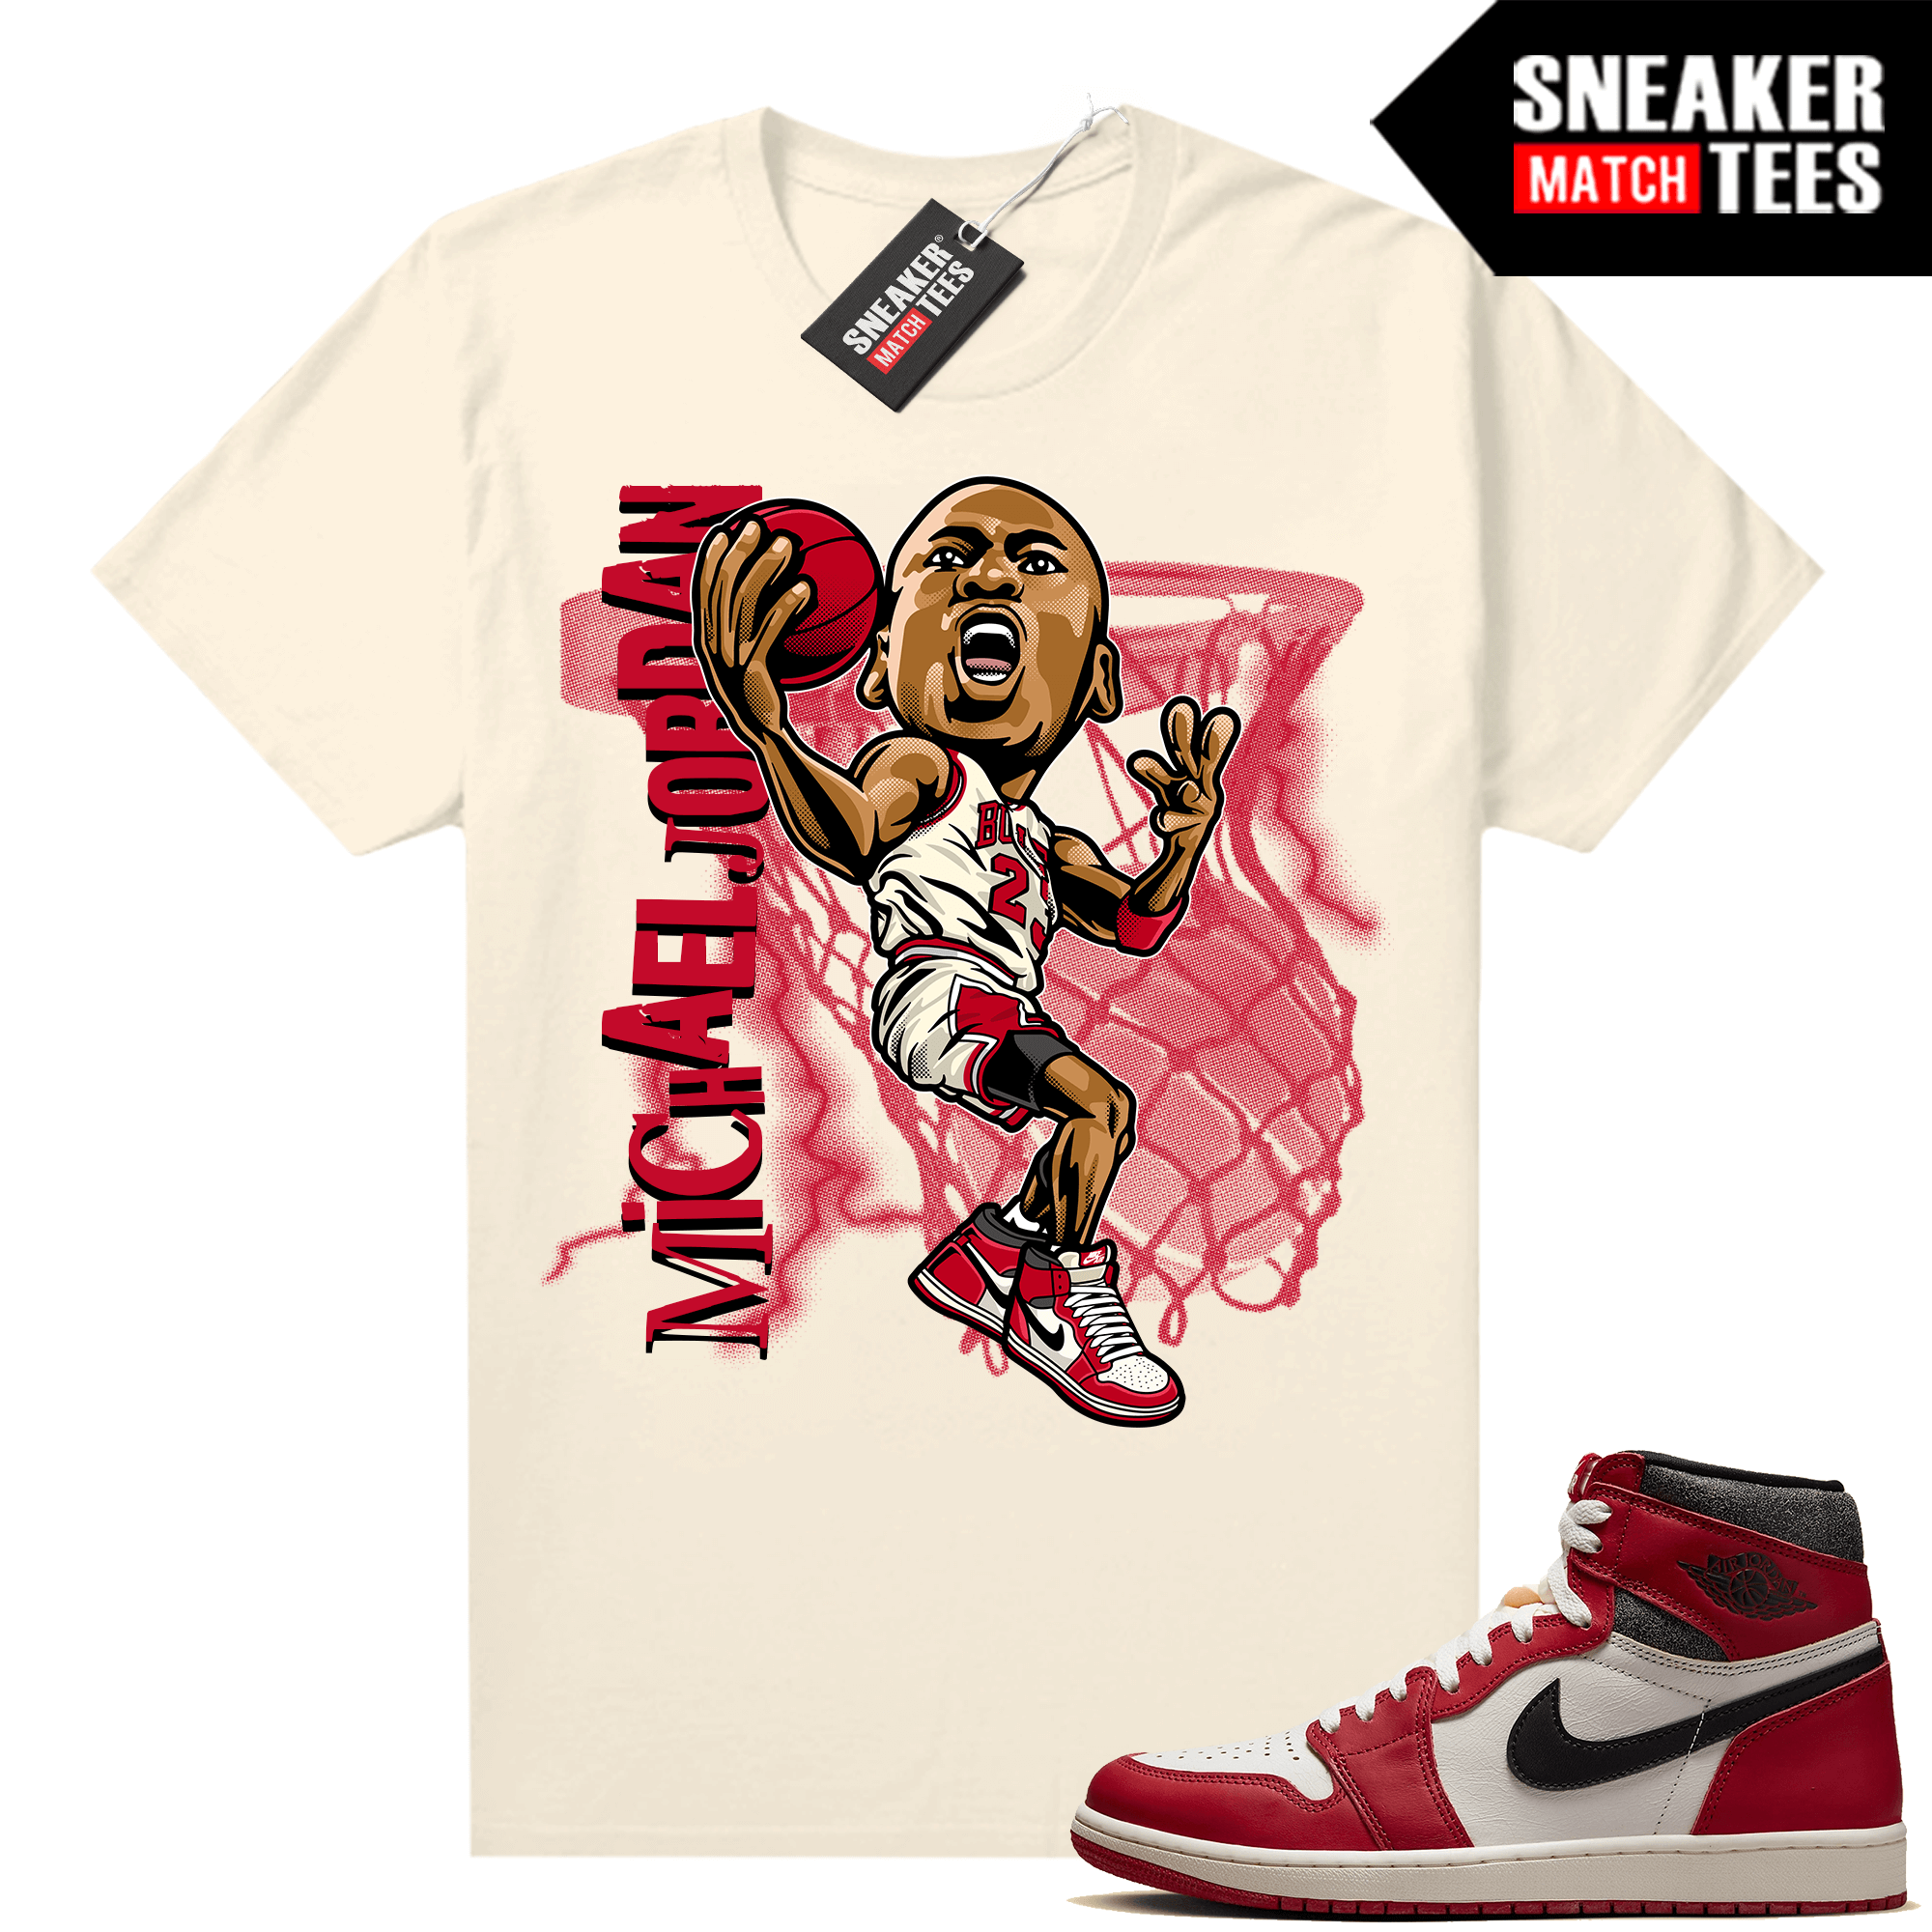 Chicago 1s Lost and Found Sneaker Match Shirt MJ Showtime